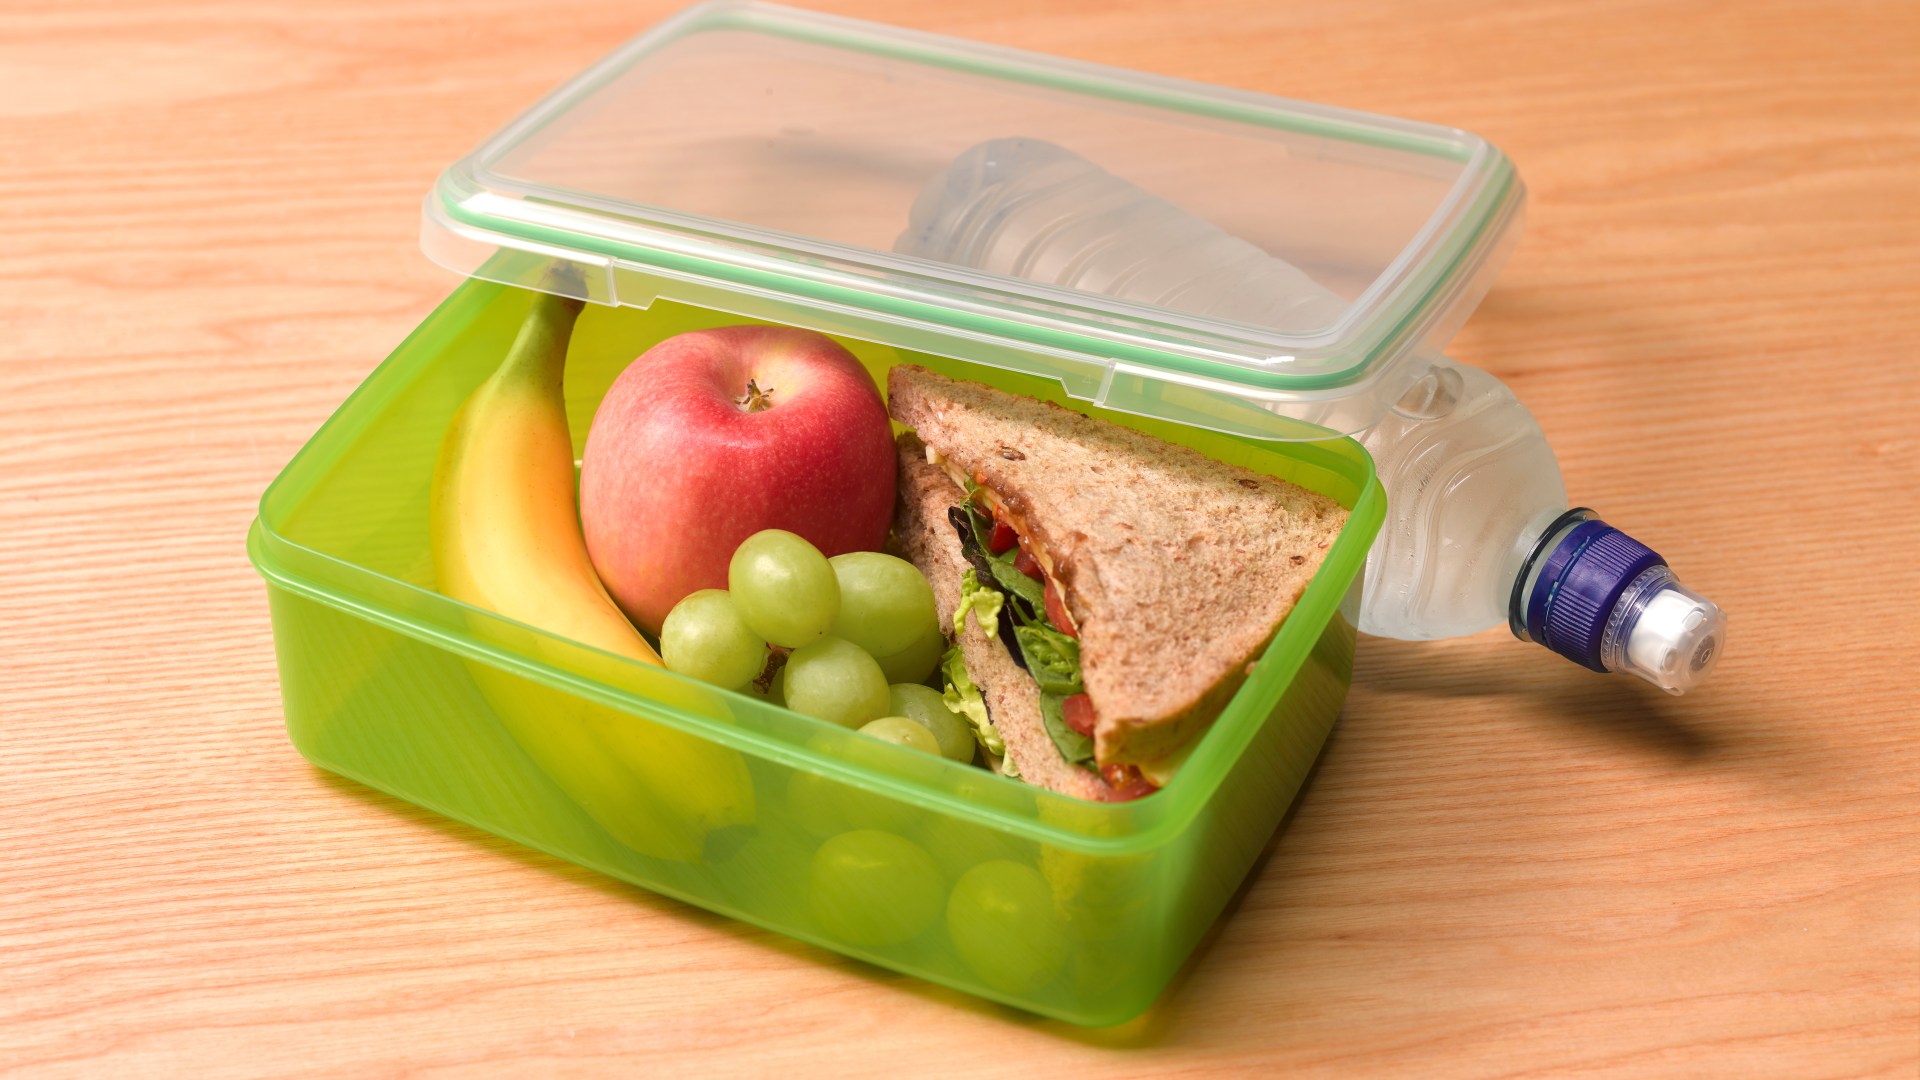 The 10 foods to give to your kid to help them focus at school, according to nutritionists